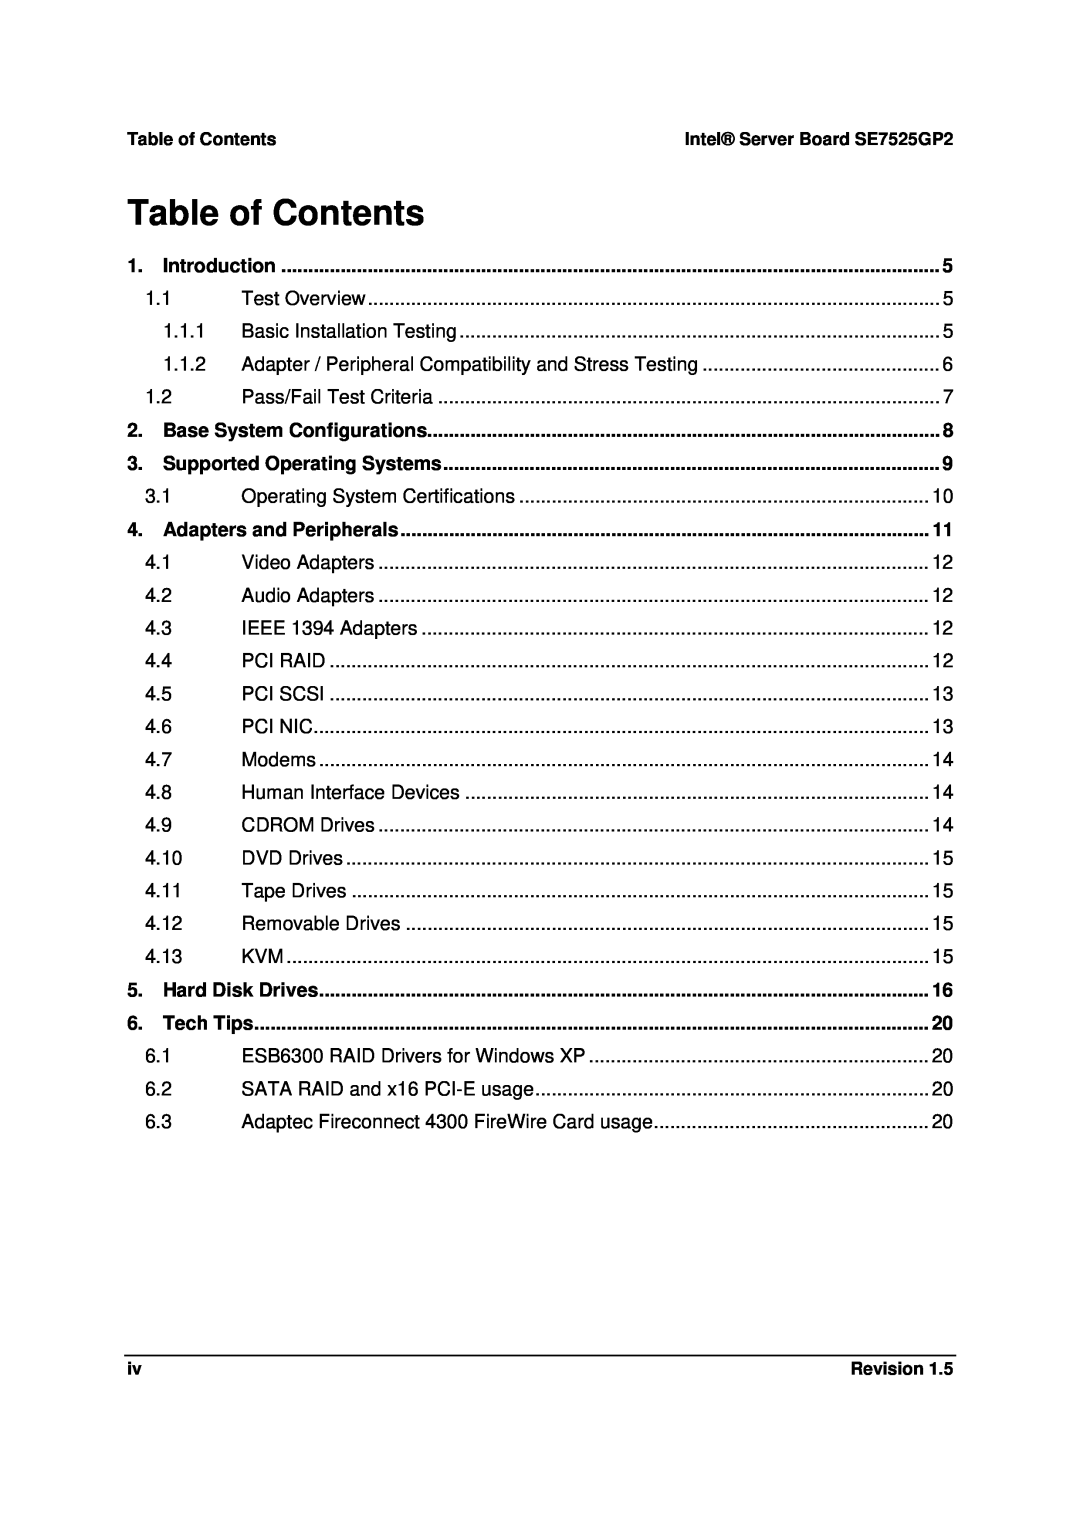 Intel SE7525GP2 manual Table of Contents 